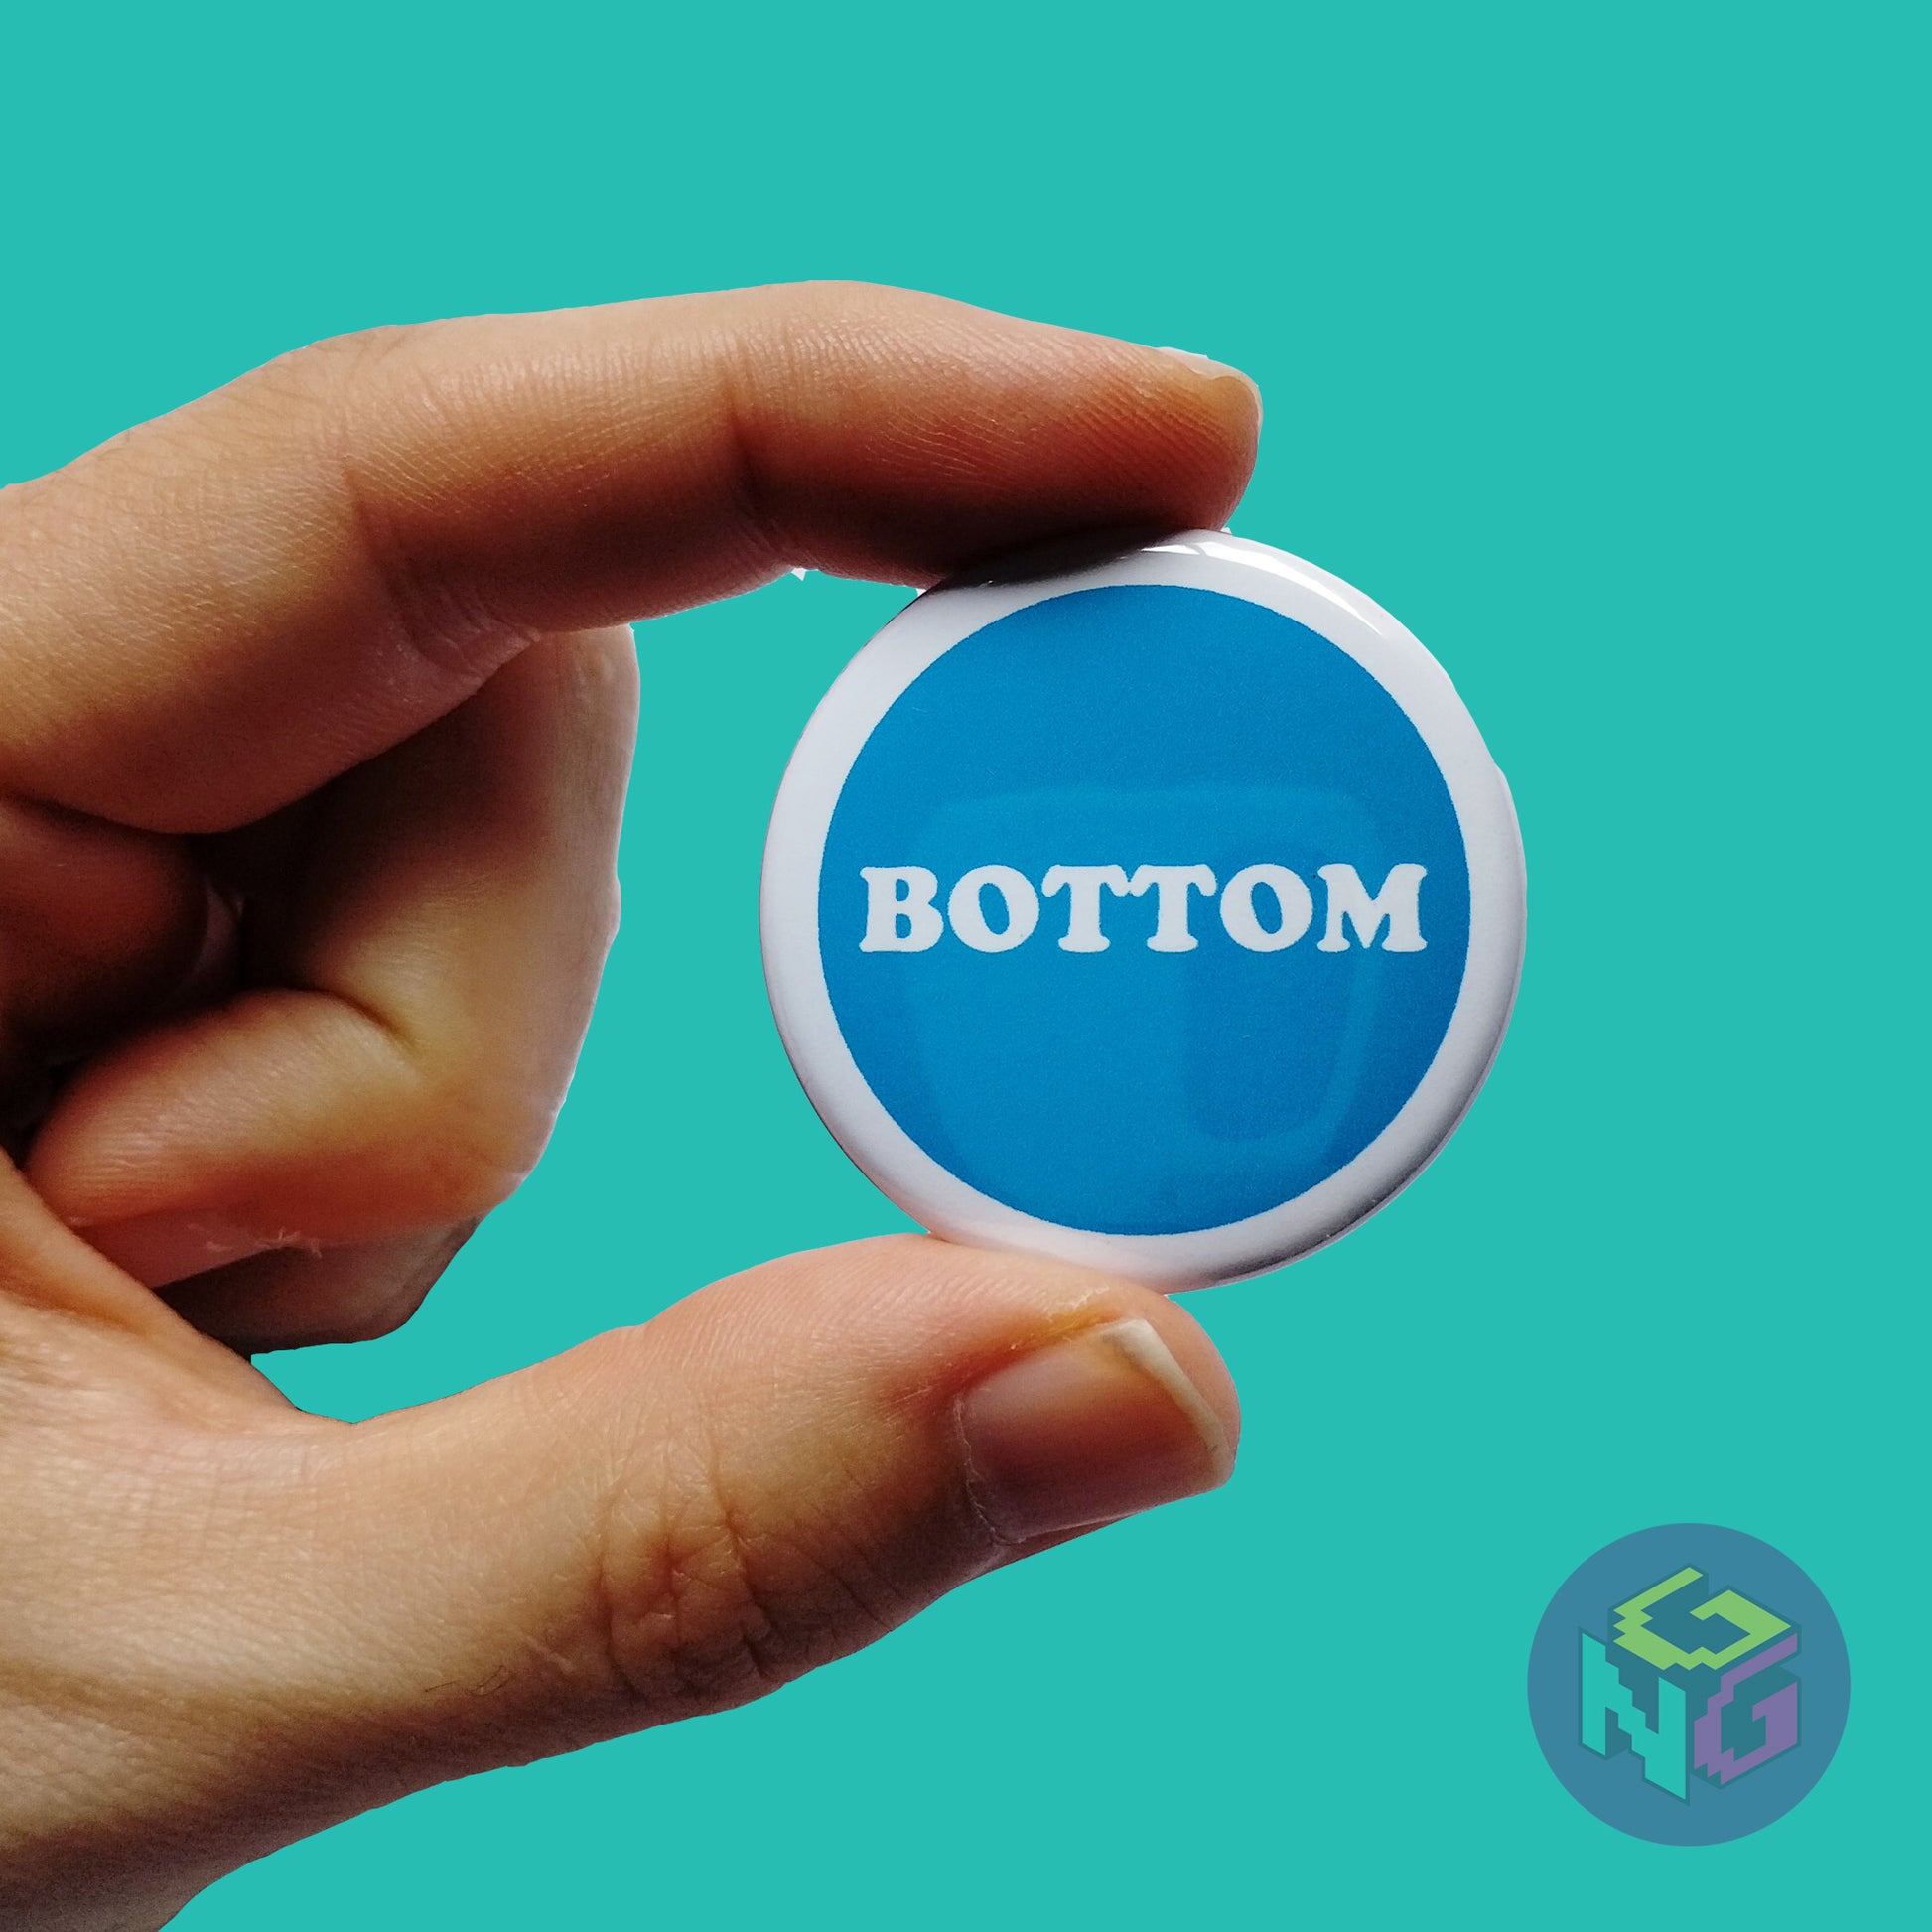 blue bottom button held in hand in front of mint green background